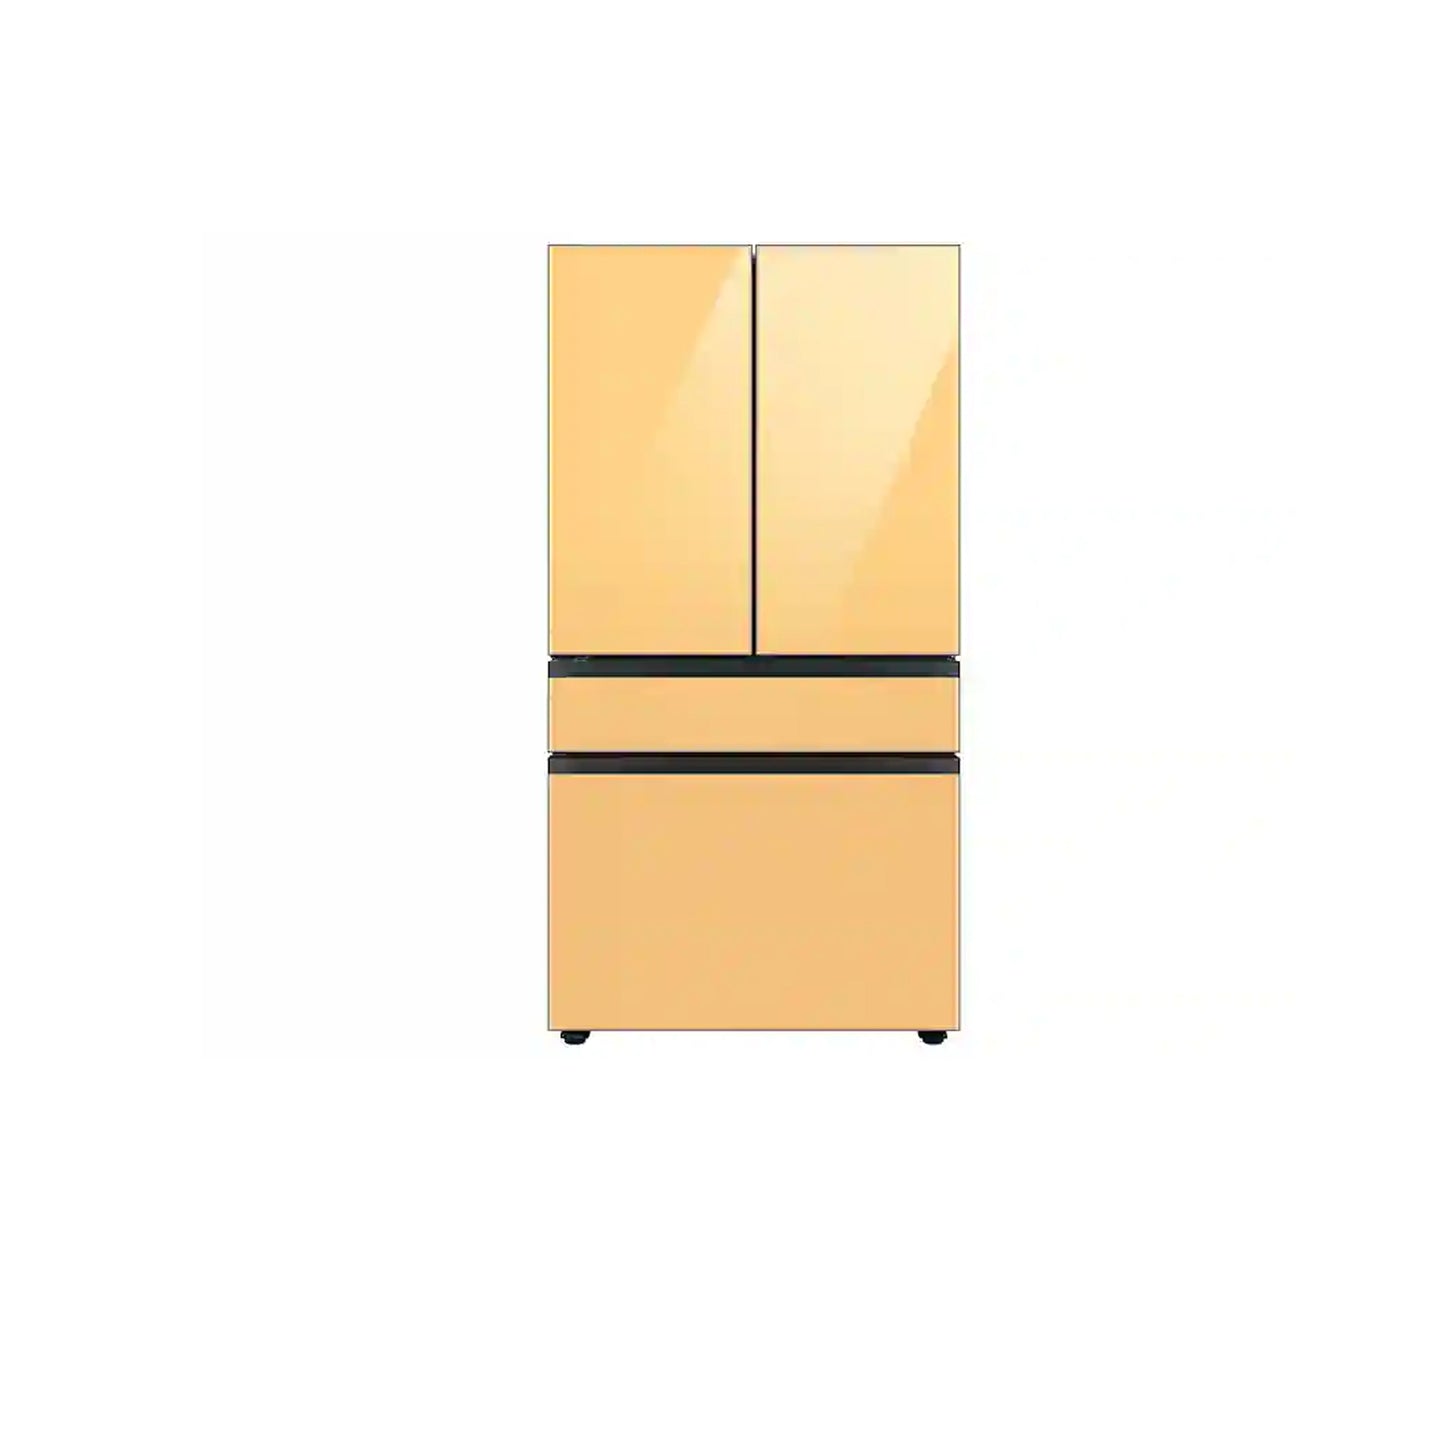 Bespoke 4-Door French Door Refrigerator (23 cu. ft.) with Customizable Door Panel Colors and Beverage Center™ in Emerald Green Steel Top, White Glass Middle, and Clementine Glass Bottom Panels.